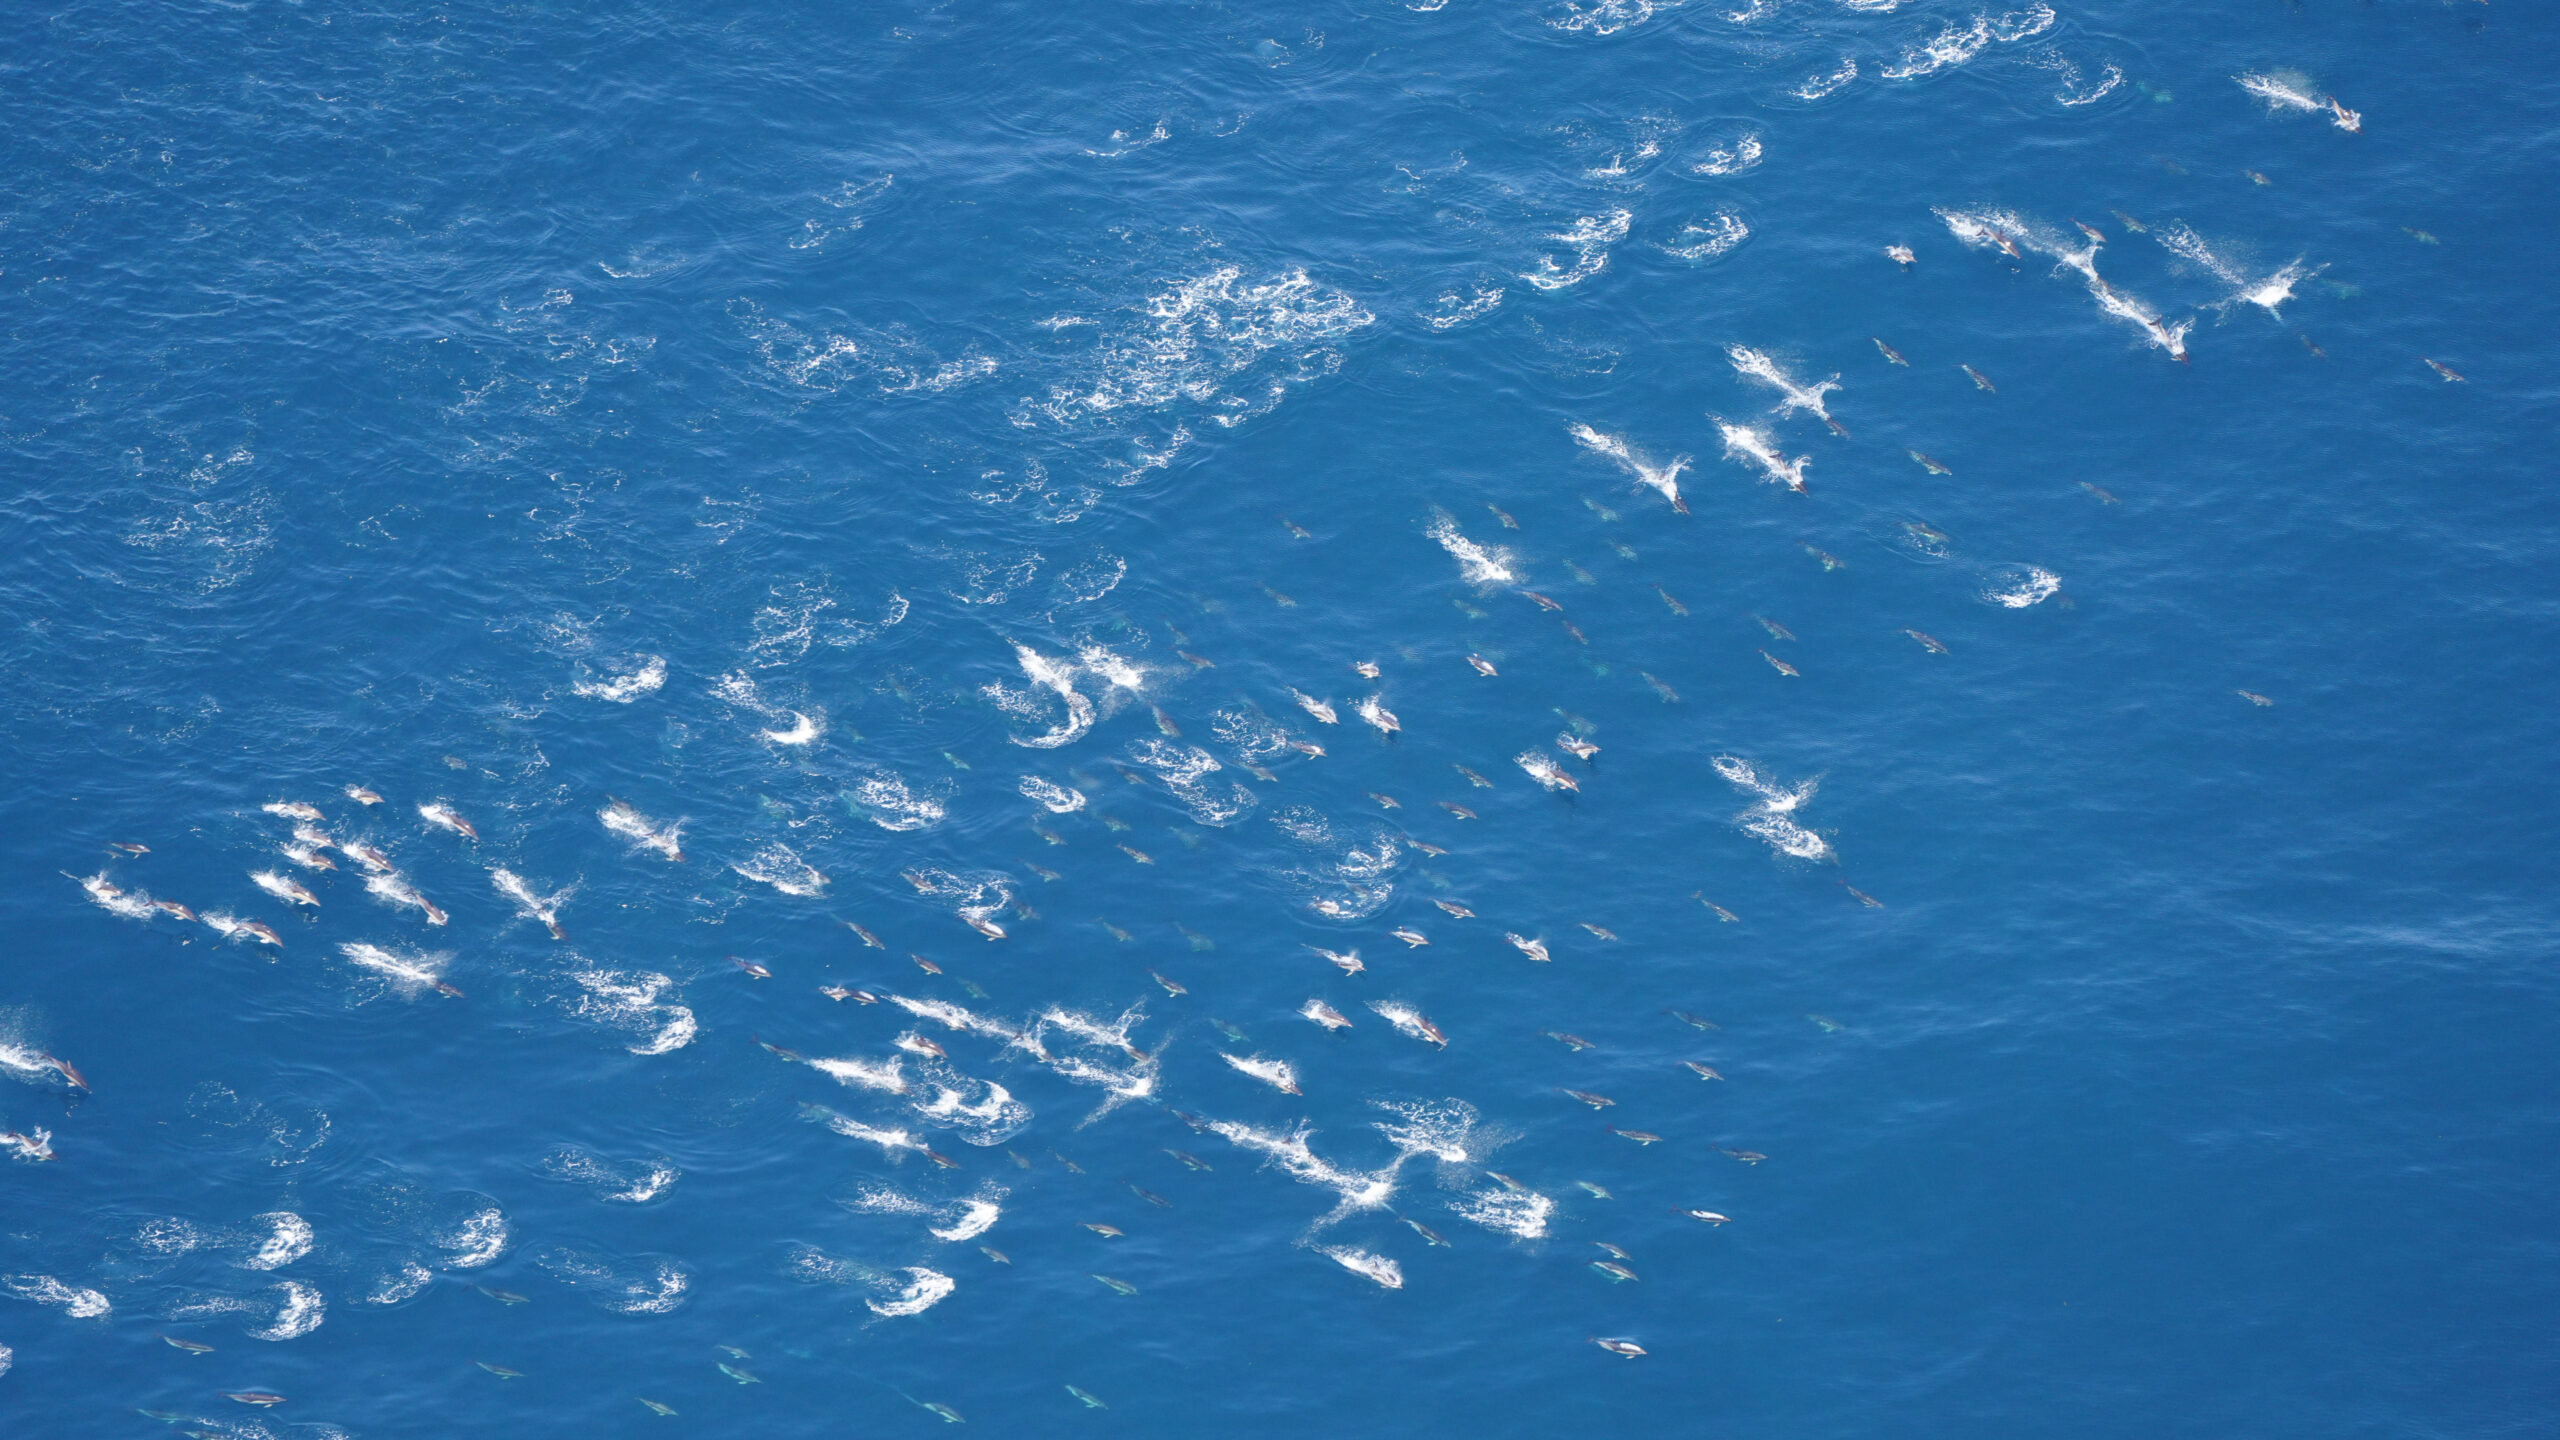 Pod of common dolphins